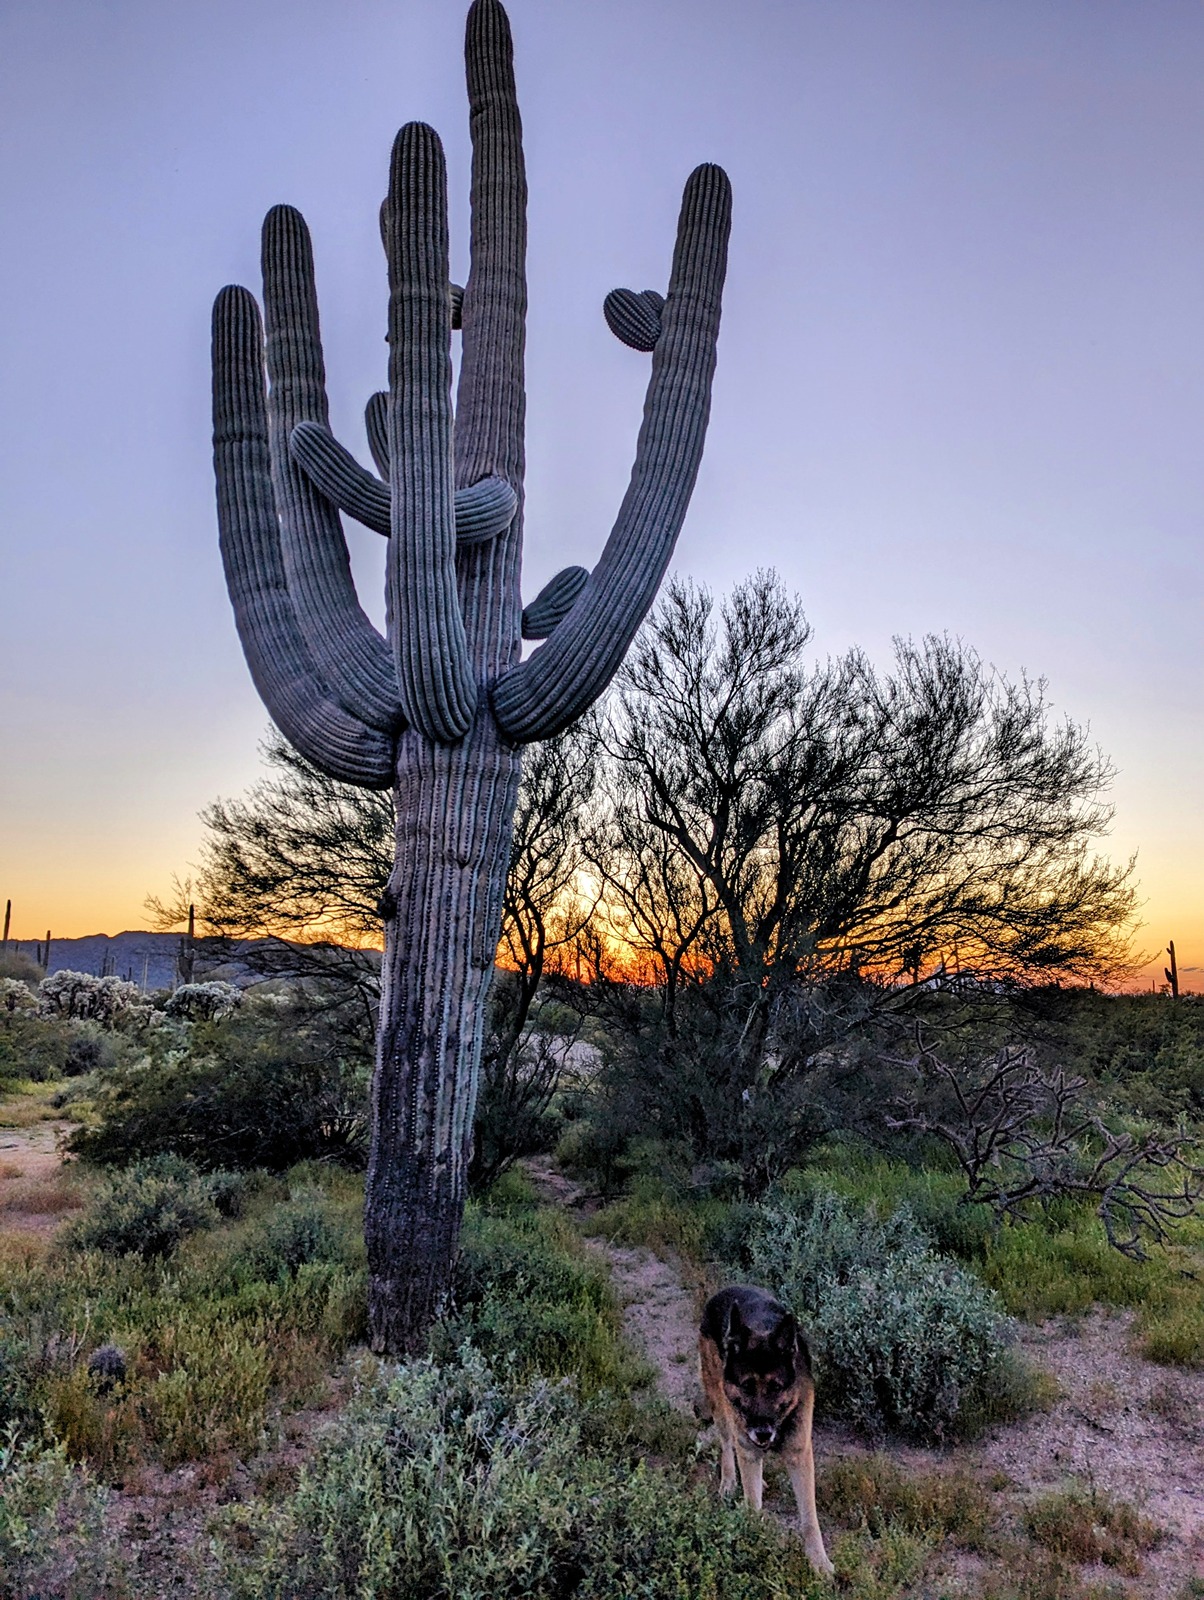 Ford Bronco Epic road trip, but had to say goodbye to my German Shepherd before we made it home Thor sizes up Saguaro